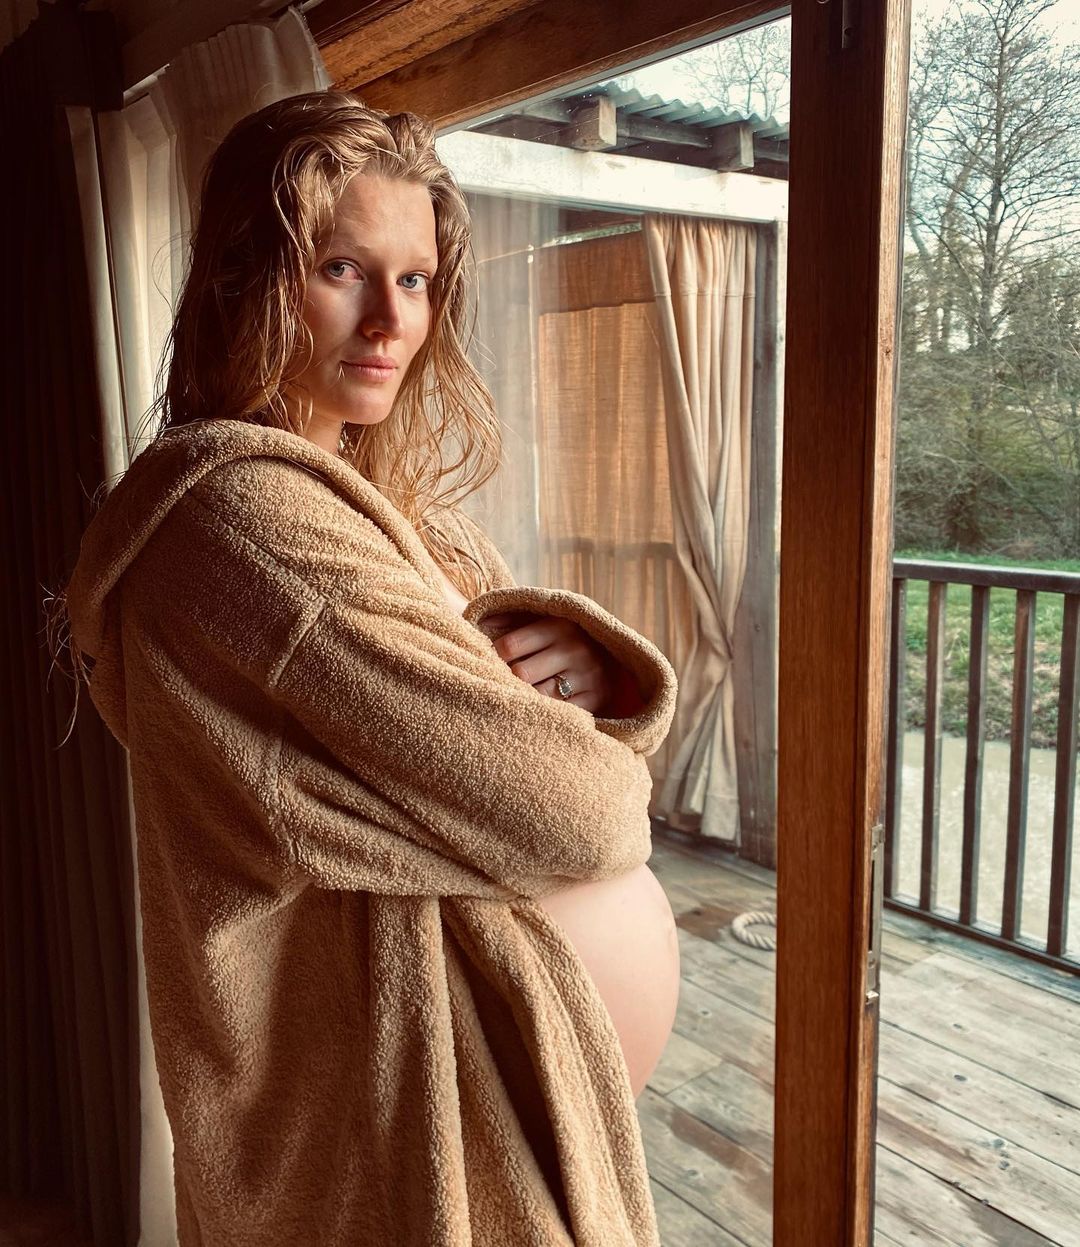 Celebrities Posing Nude While Pregnant Maternity Pics pic